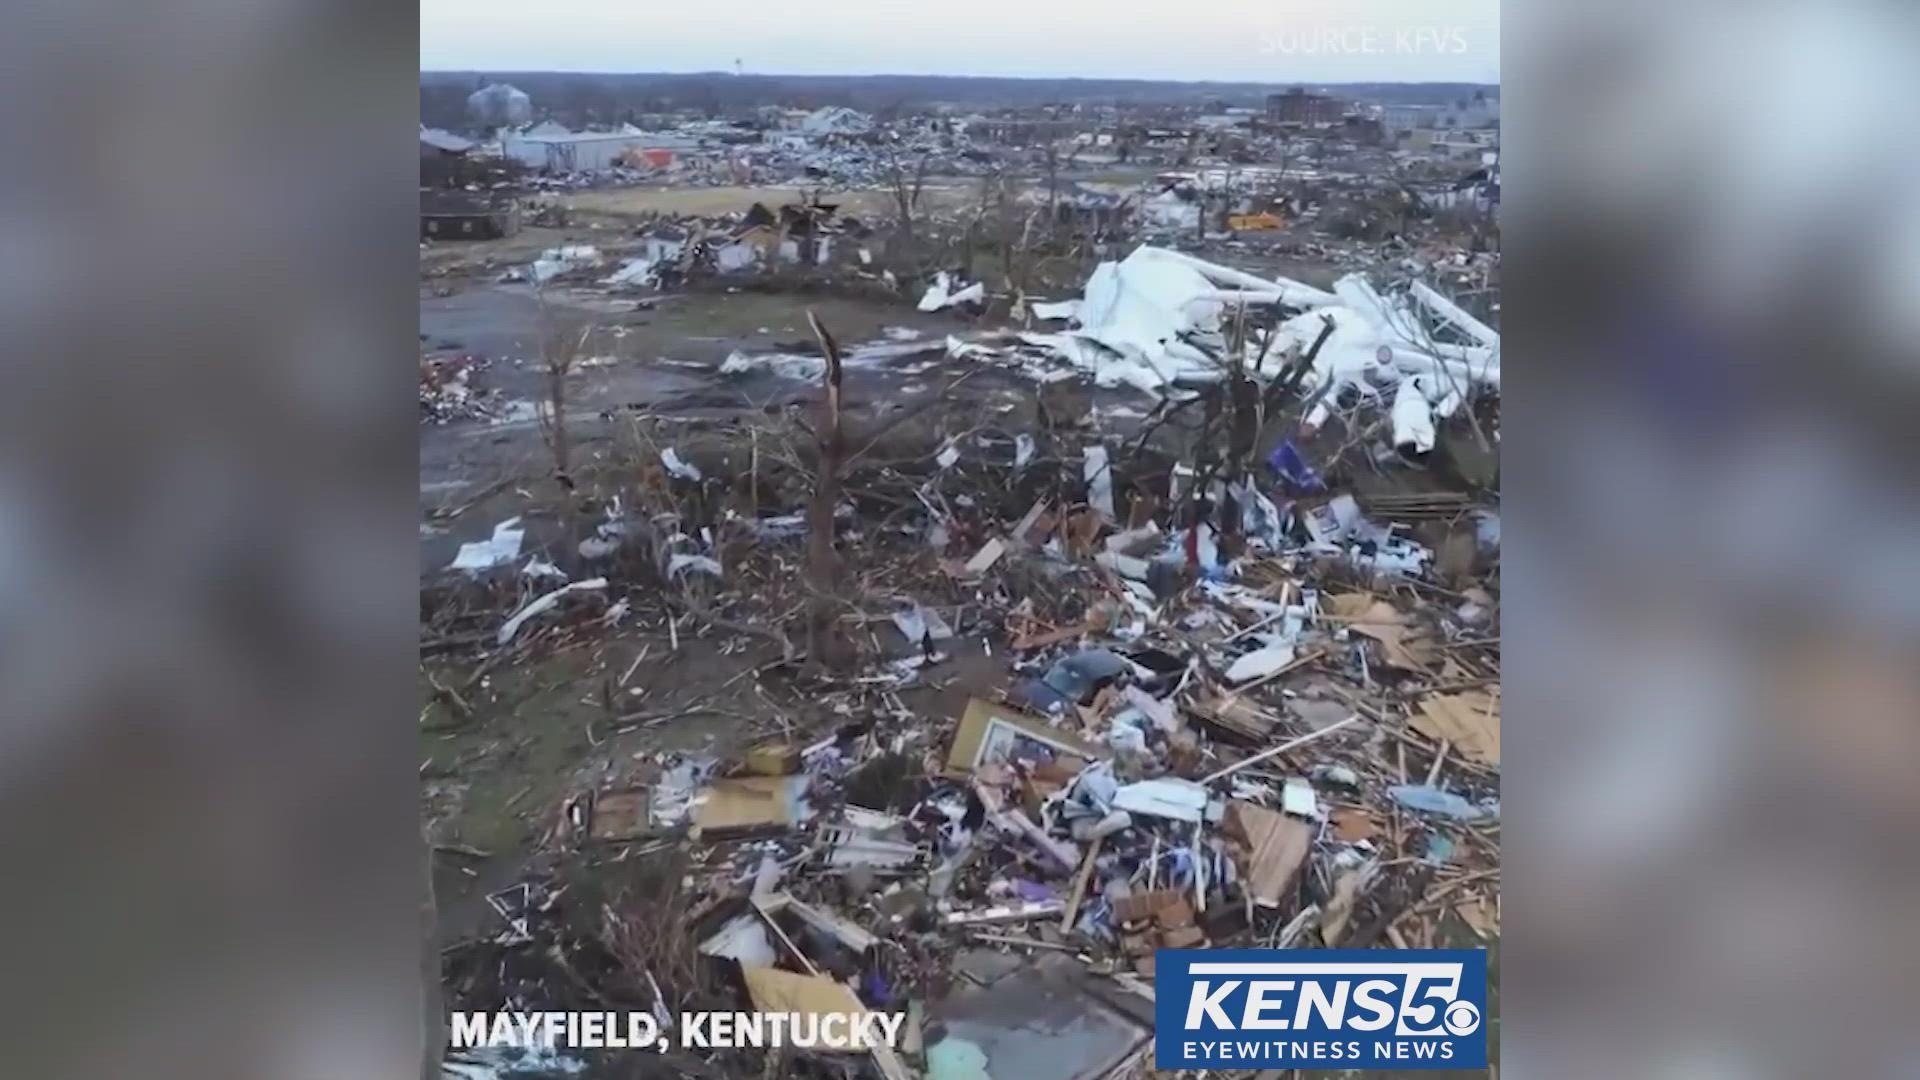 Miles of devastation in Mayfield, Kentucky after deadly tornados and severe weather hit several Midwest states overnight.